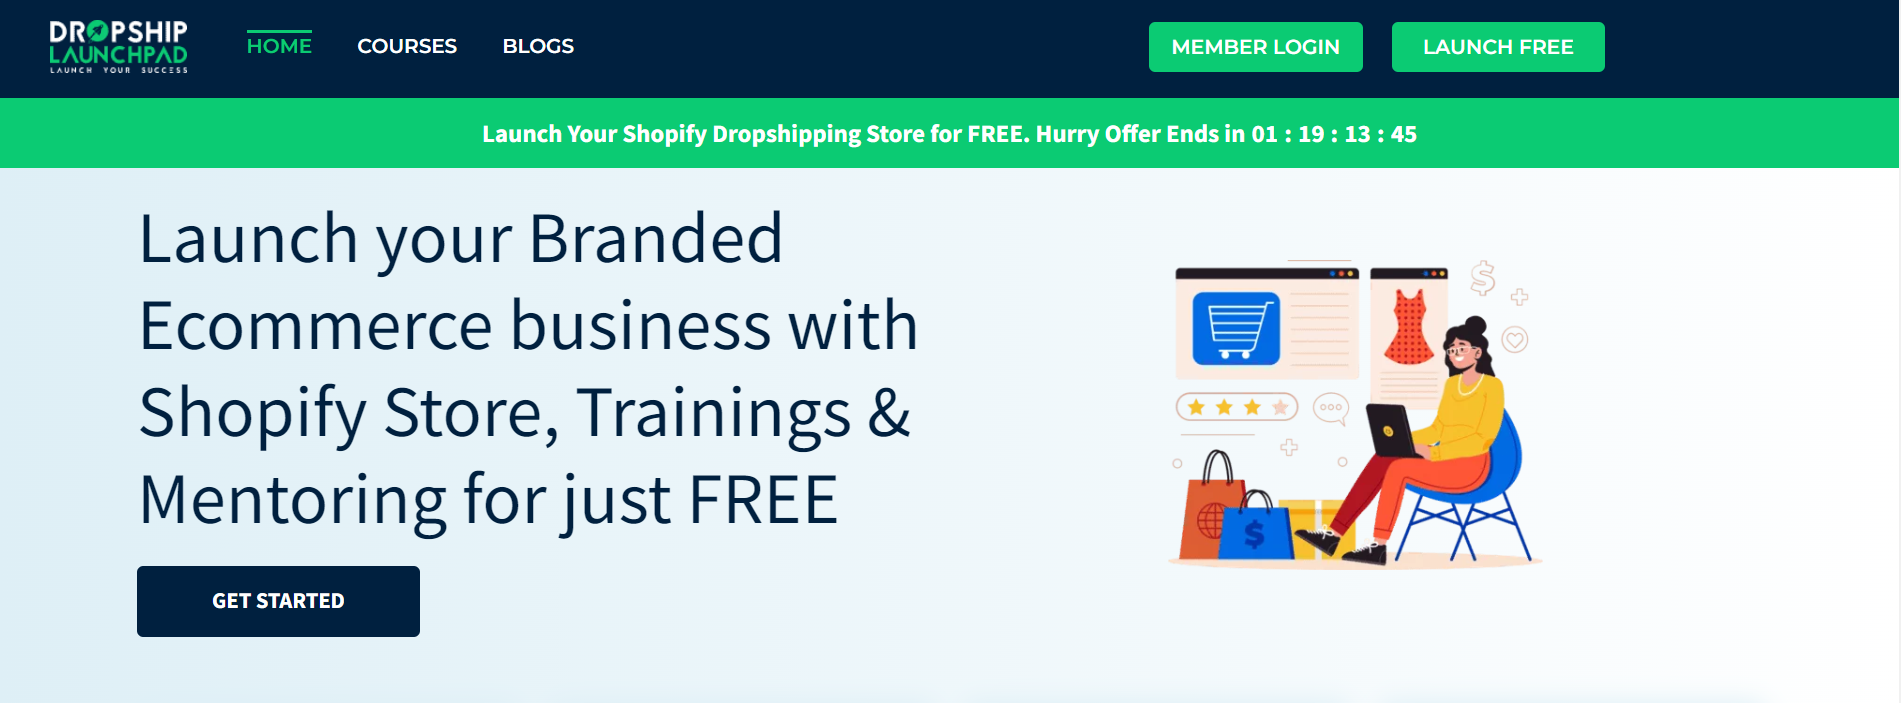 How can I optimize my Dropship Launchpad store for bag dropshipping success?